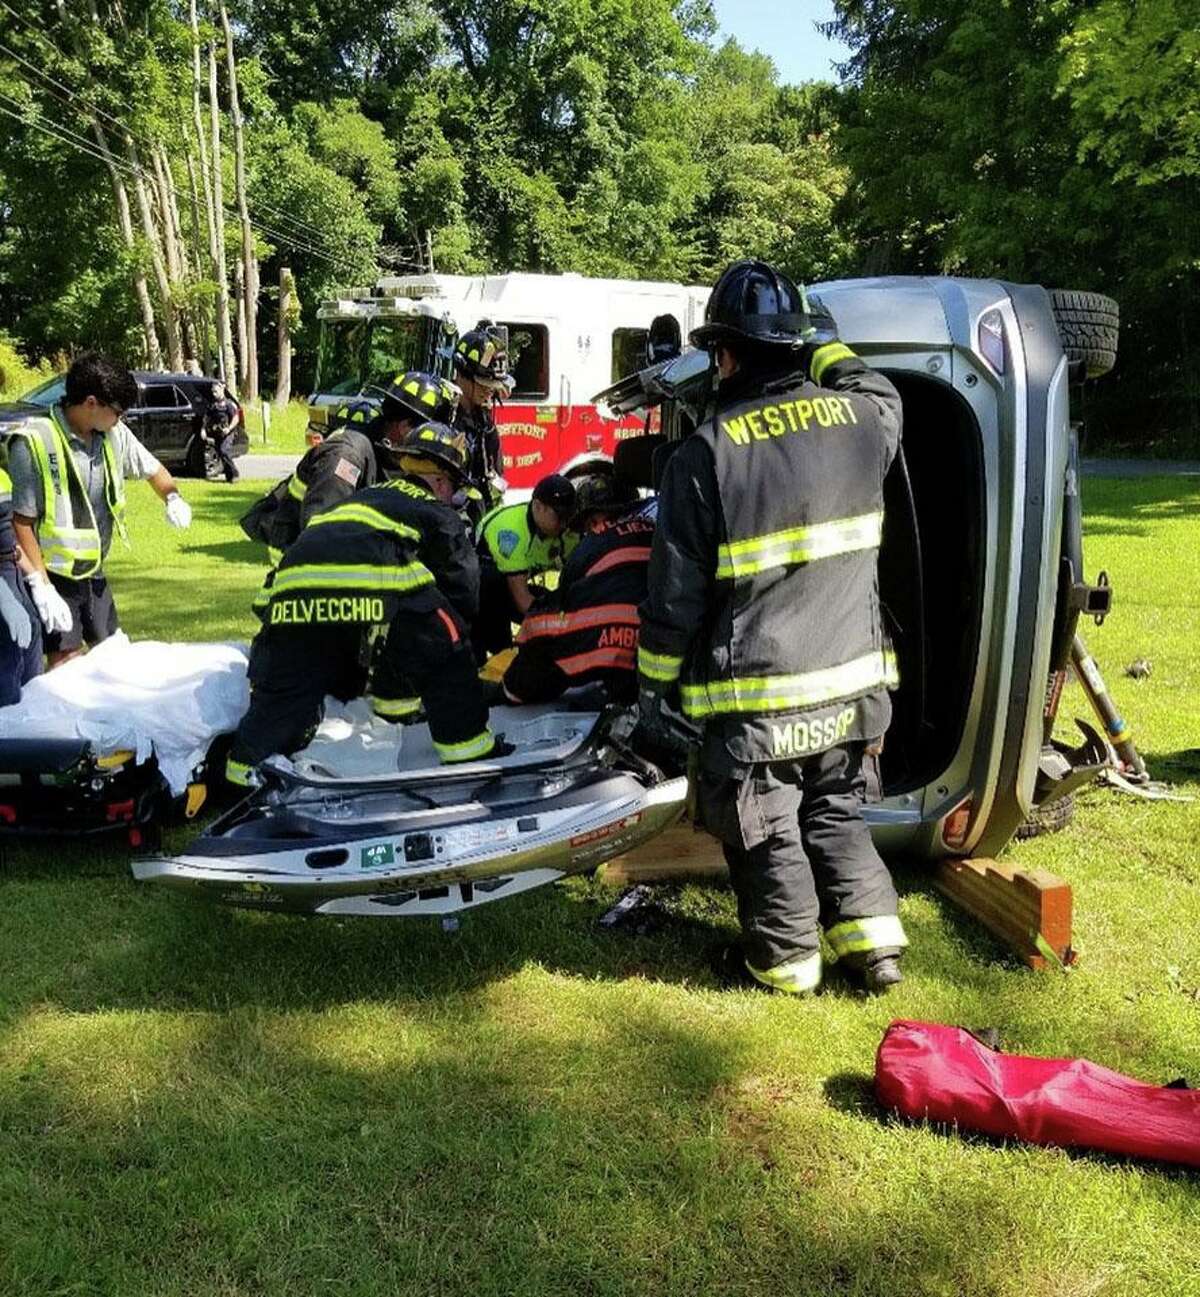 A driver was sent the hospital on Sunday, July 14, 2019 after a rollover crash in Westport.